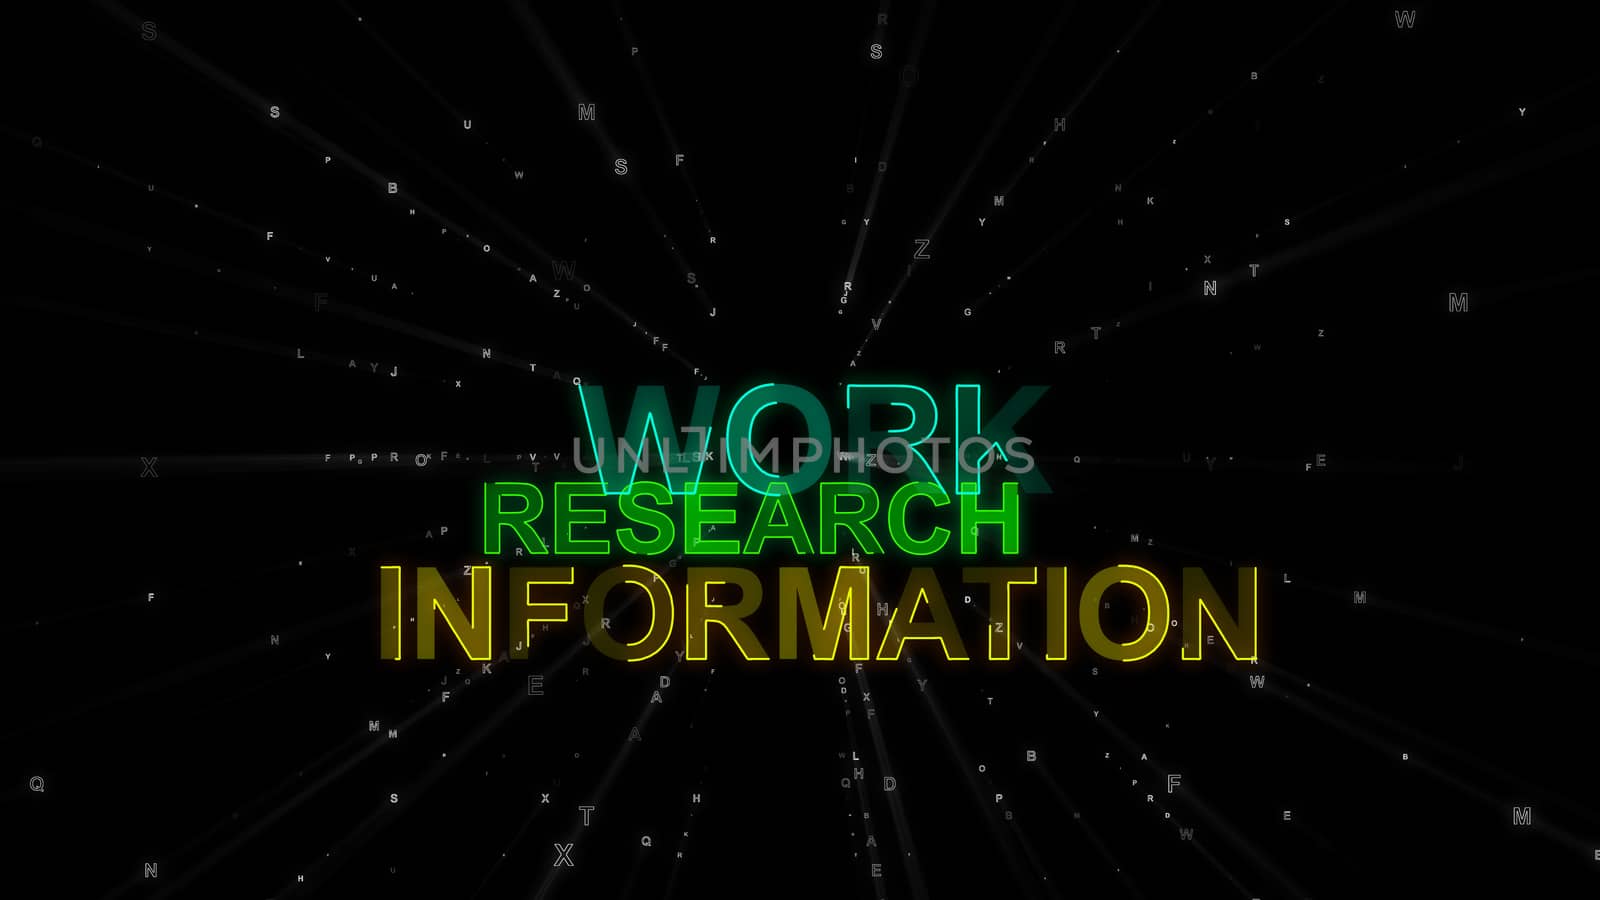 An impressive 3d illustration of such concept words as work, research and information. They are golden, salad and green in the spotted black background. They encourage to work.